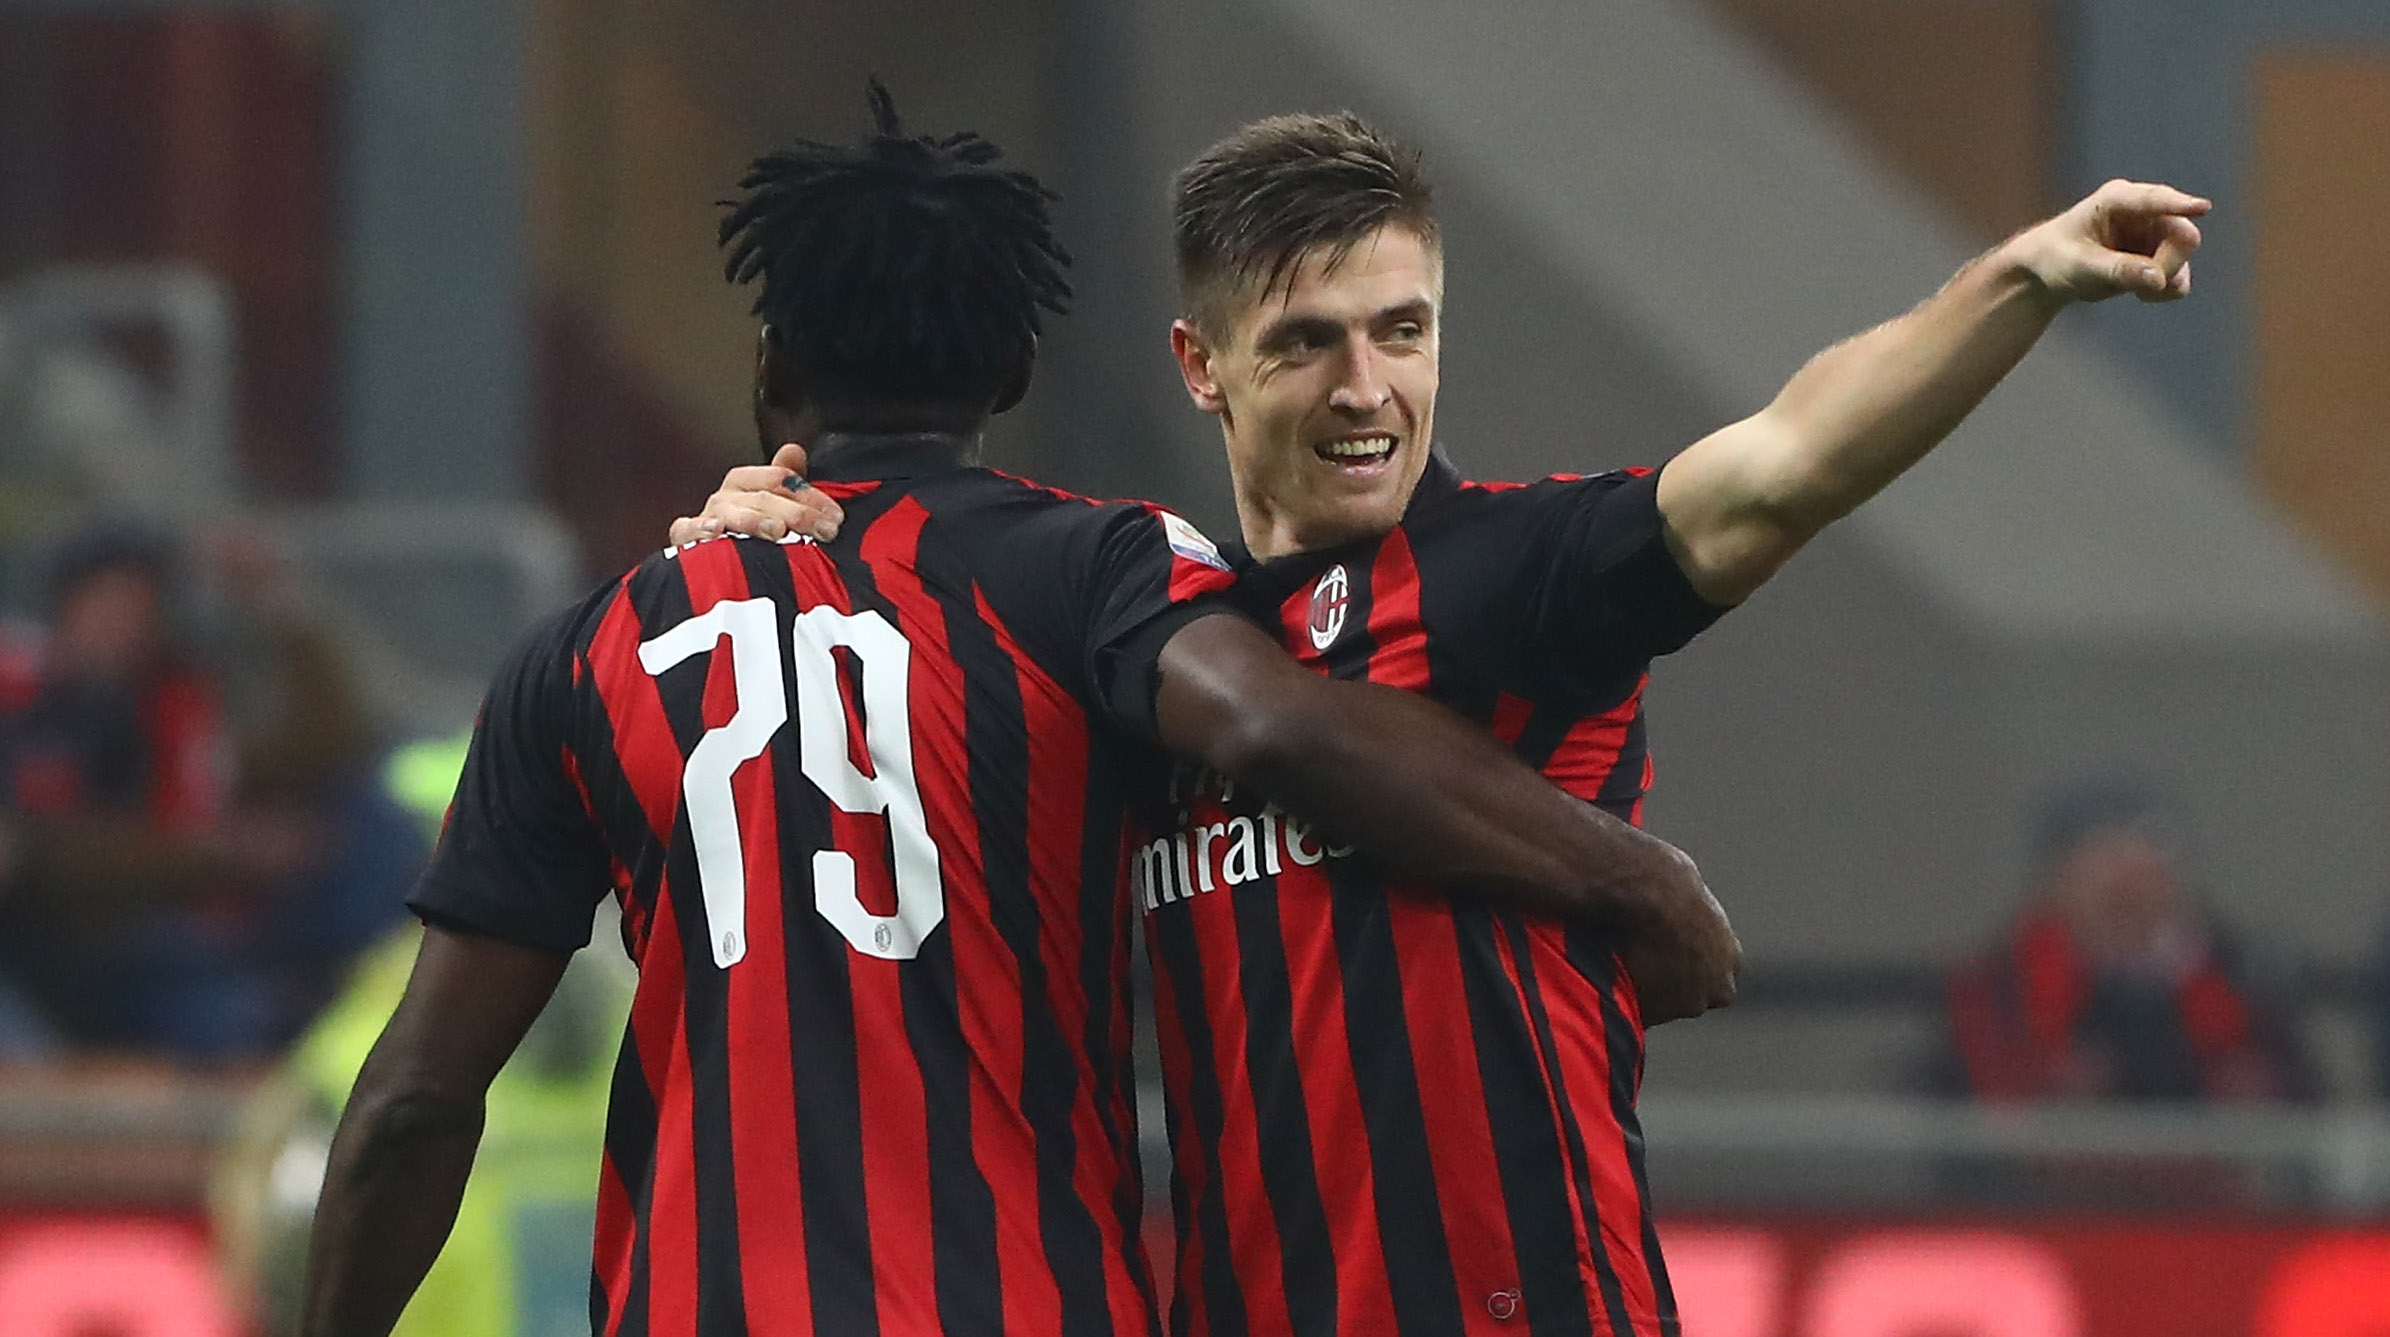 during the Serie A match between AC Milan and Cagliari at Stadio Giuseppe Meazza on February 10, 2019 in Milan, Italy.